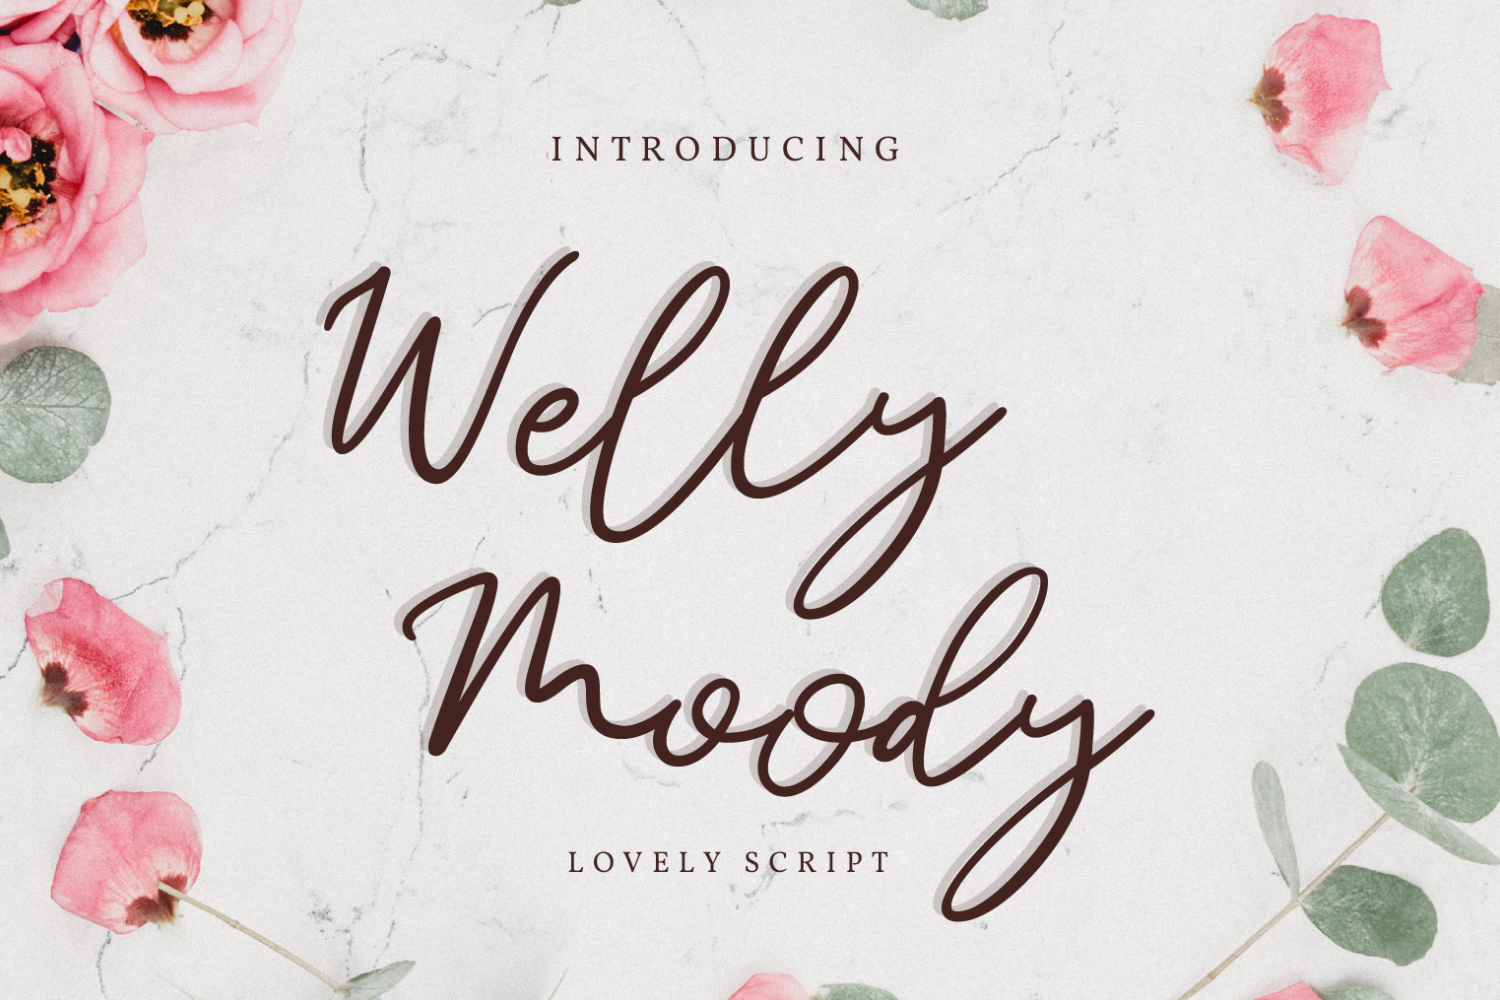 Welly & Moody